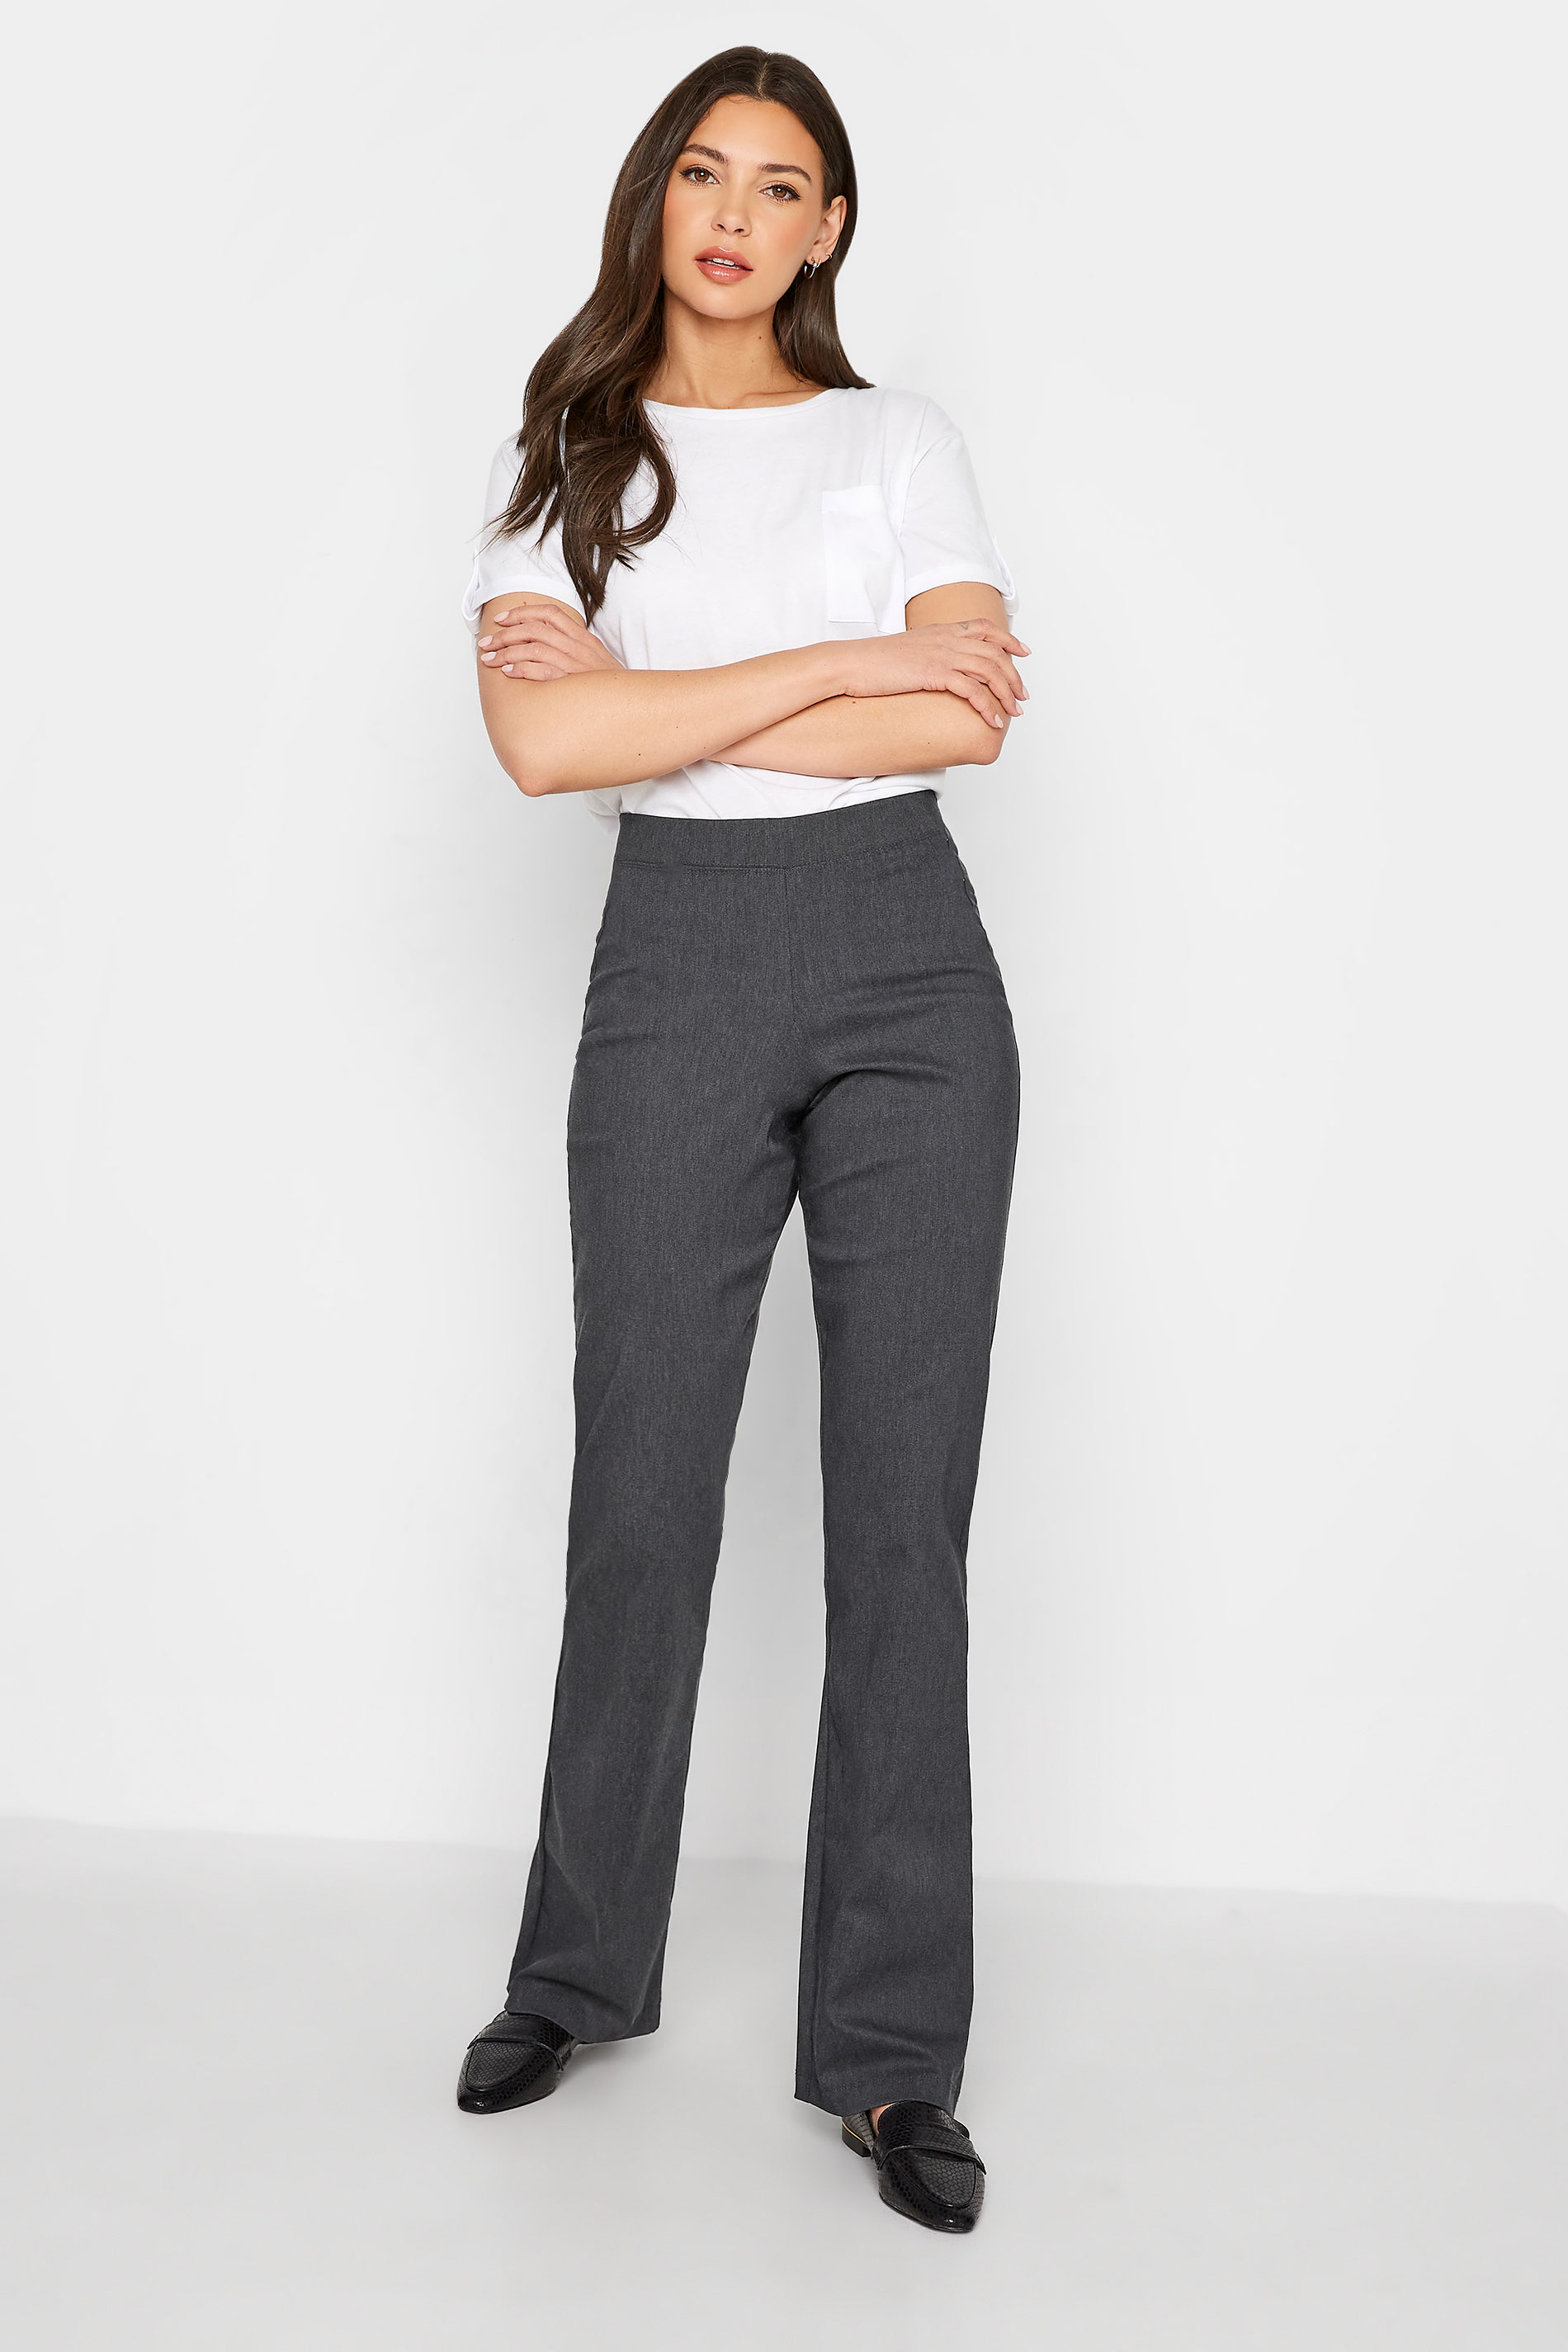 Tall Women's LTS Charcoal Grey Stretch Bootcut Trousers | Long Tall Sally  2